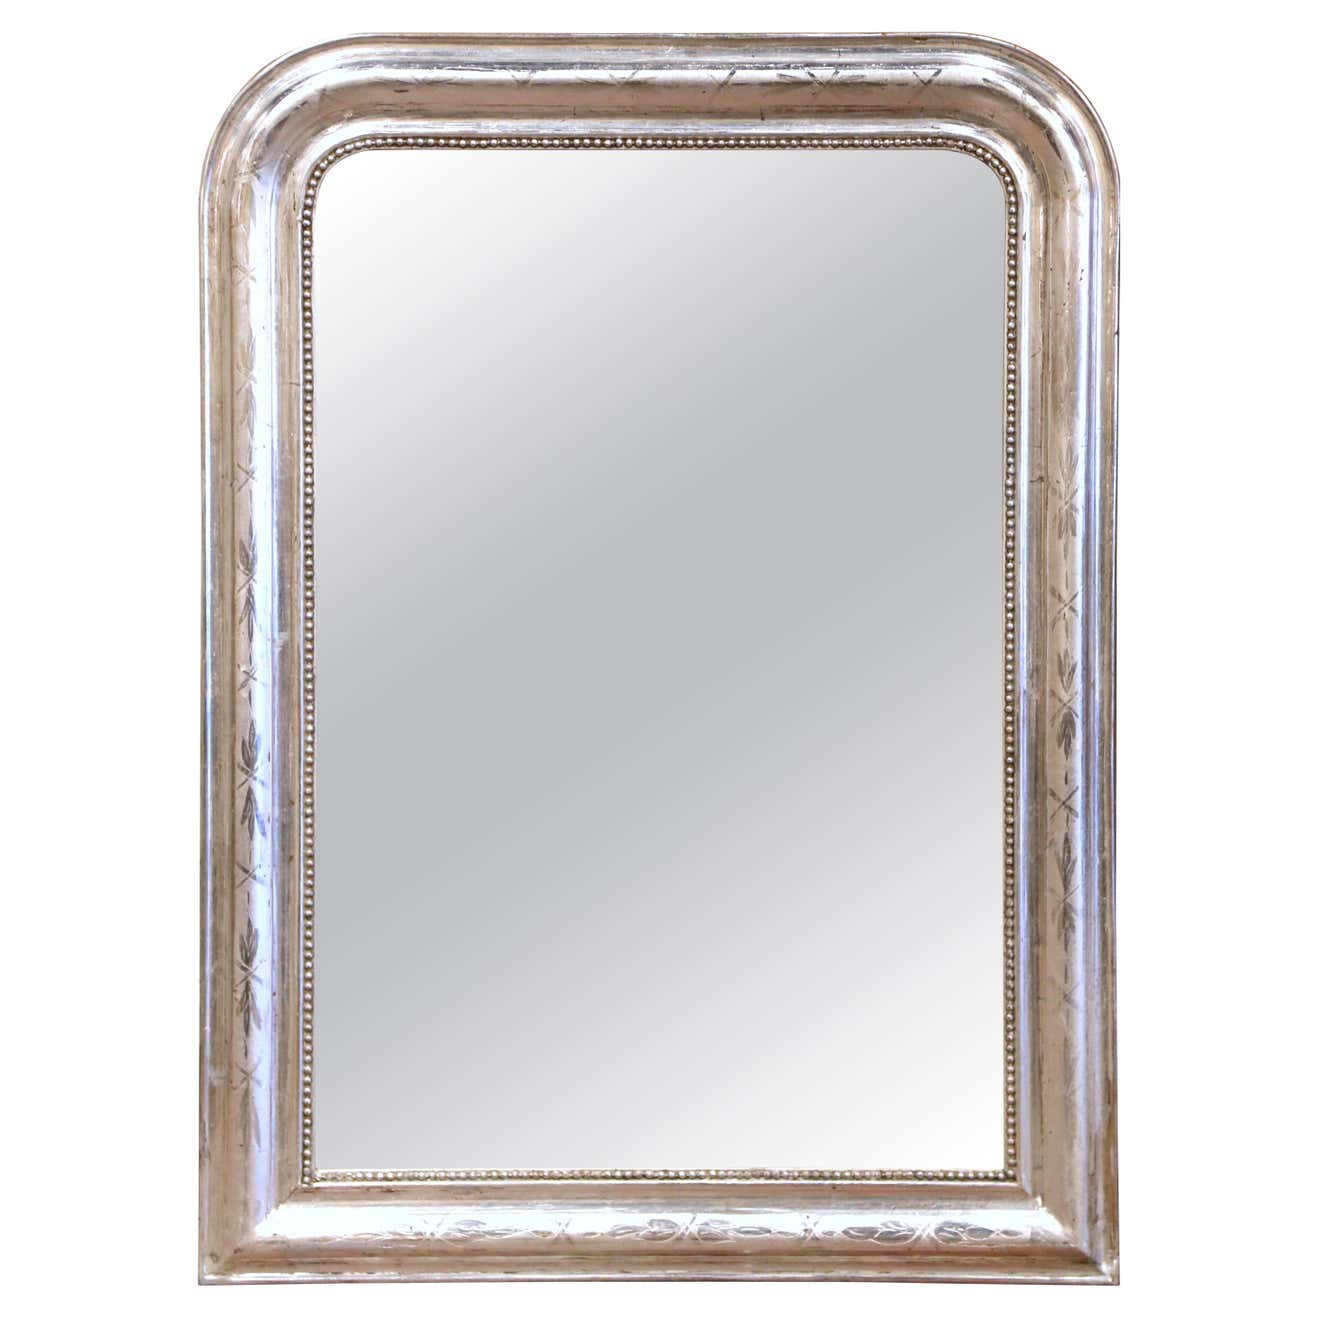 19th century French Louis Philippe mirror with gilt finish.